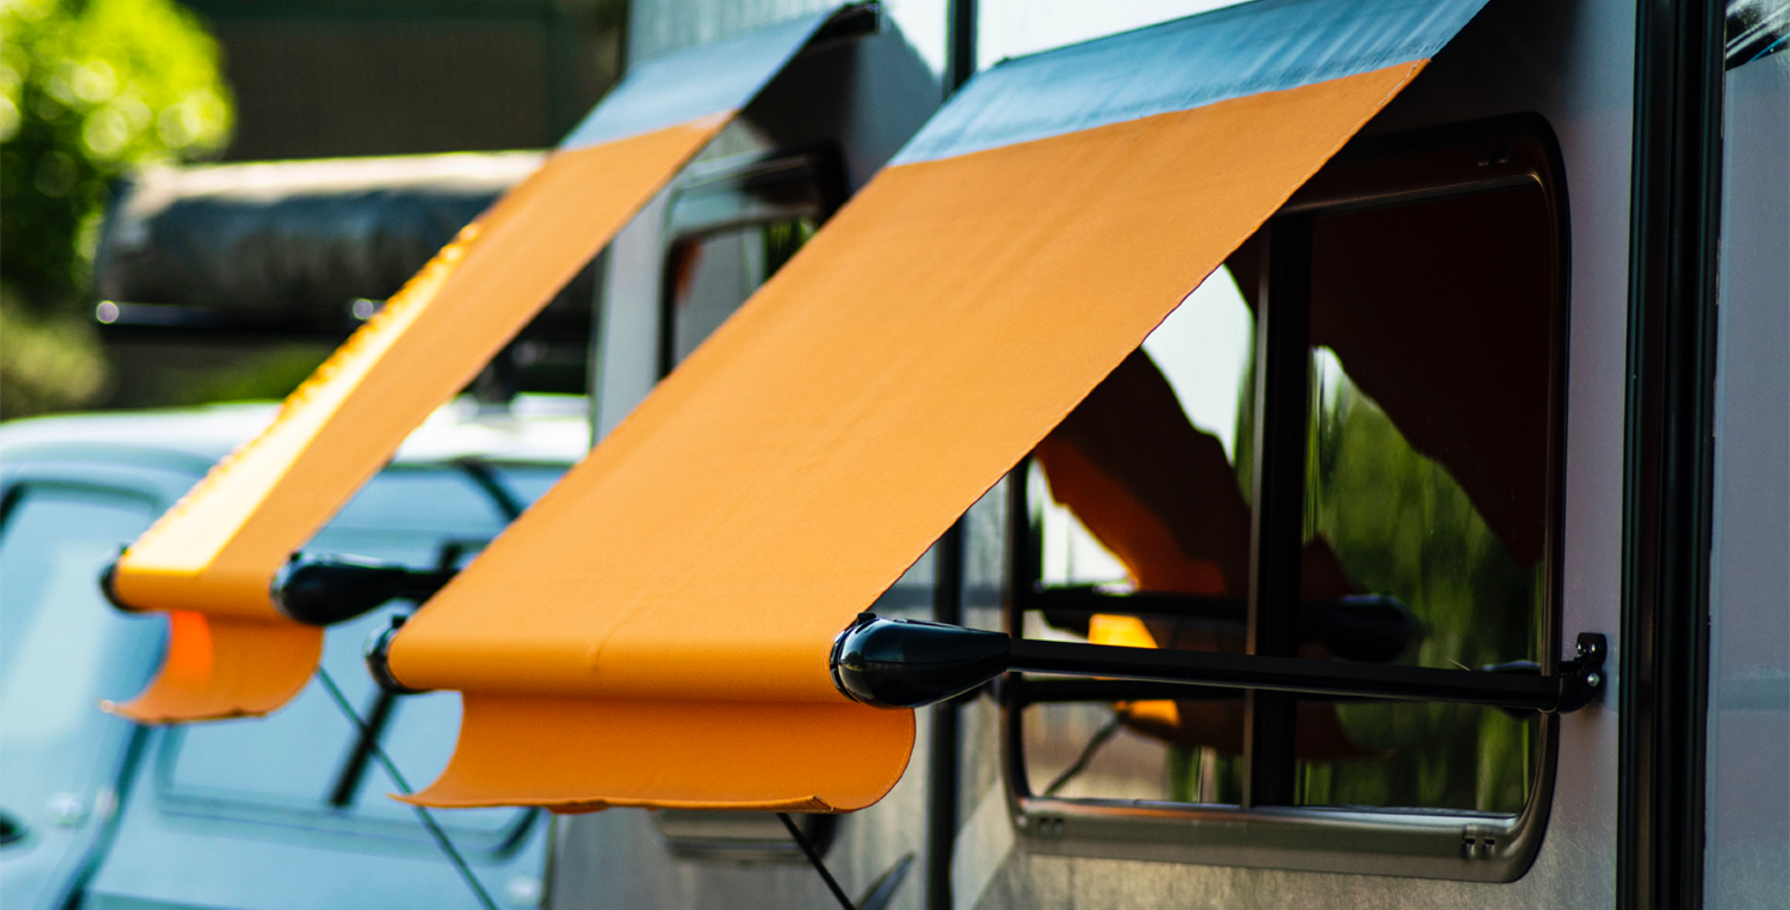 Recacril And Innovative Awning Cover Flxguard Are A Perfect Match Recasens